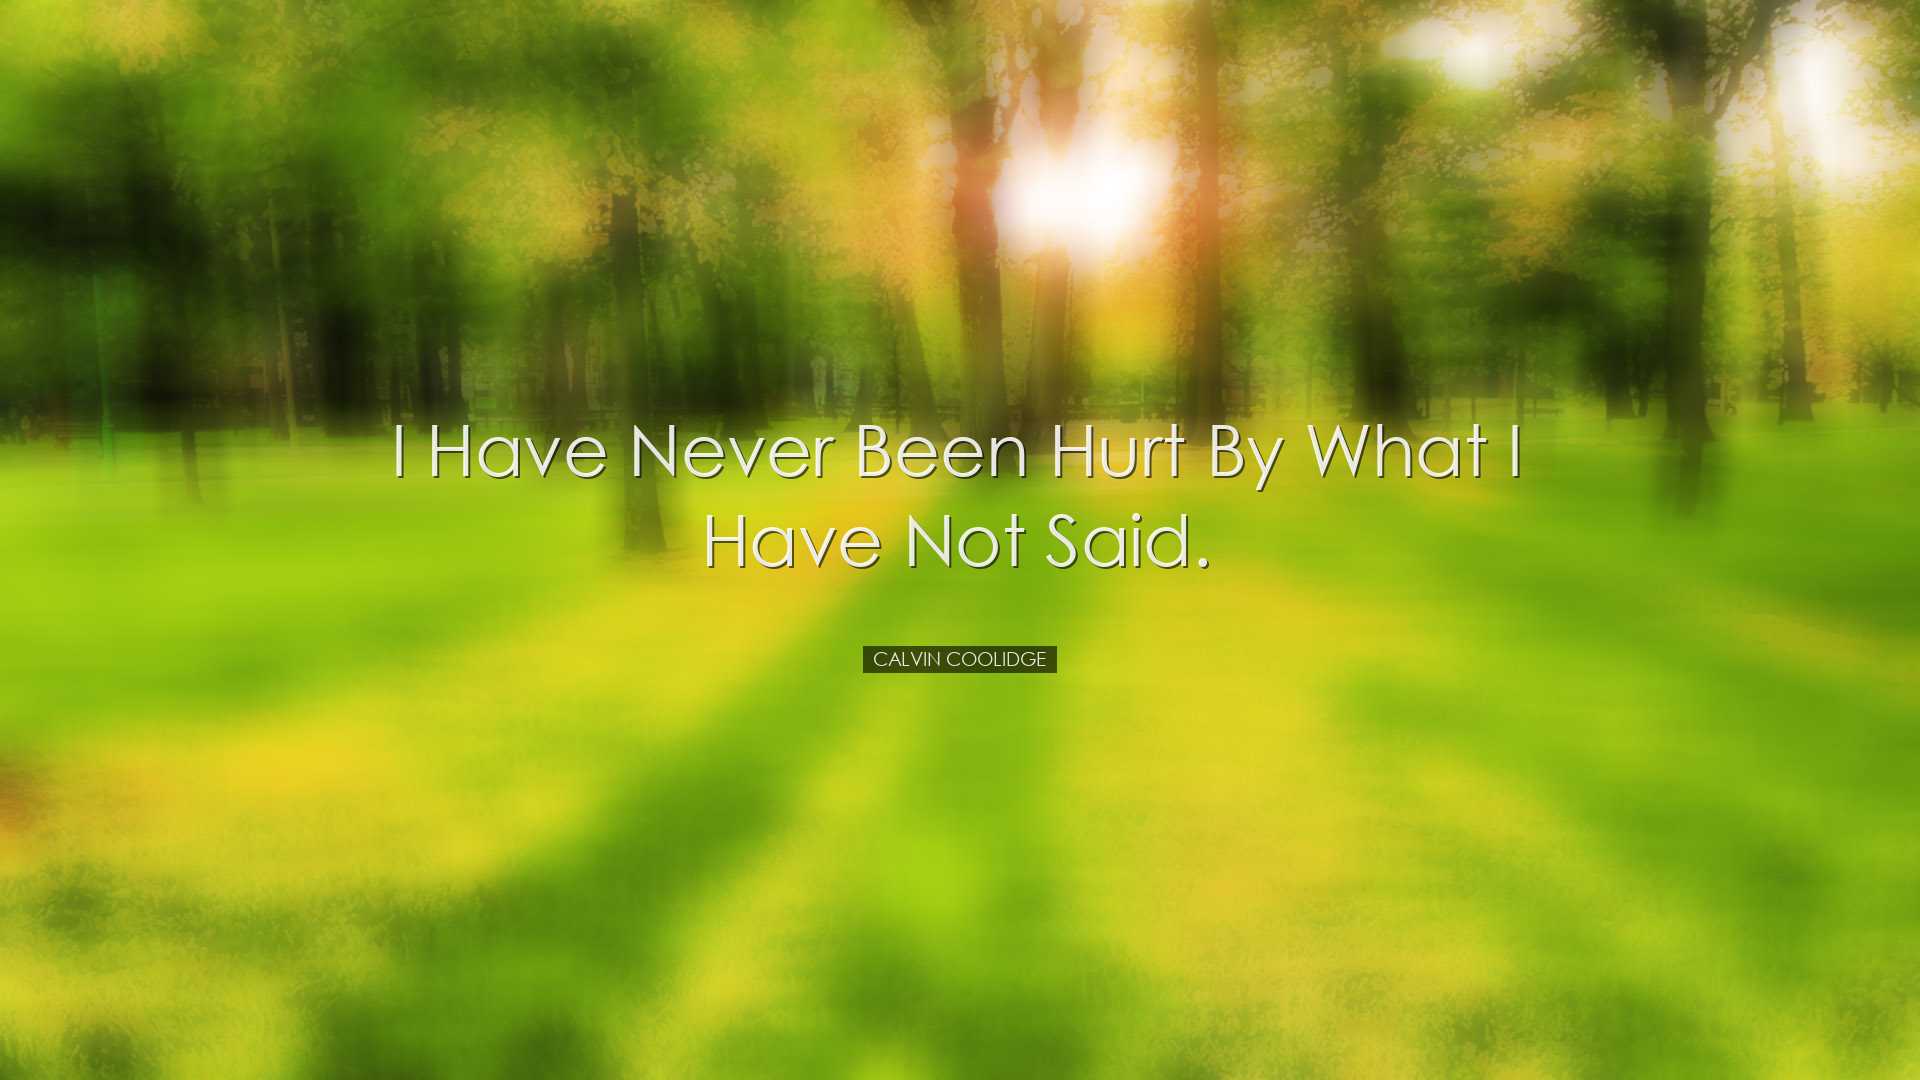 I have never been hurt by what I have not said. - Calvin Coolidge